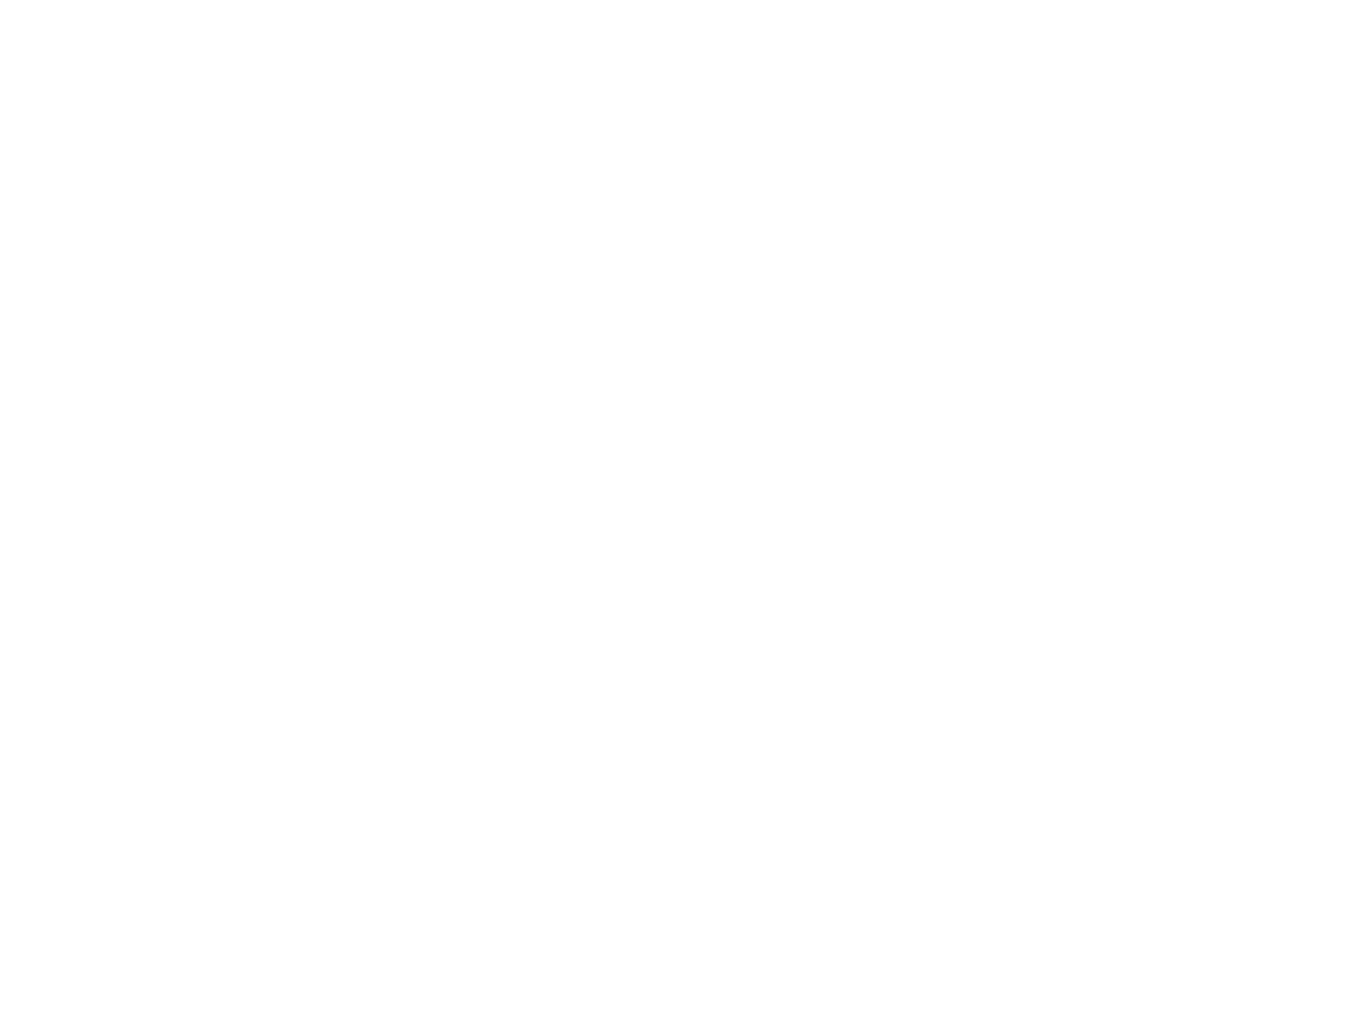 Rethink what you think about working in public health.